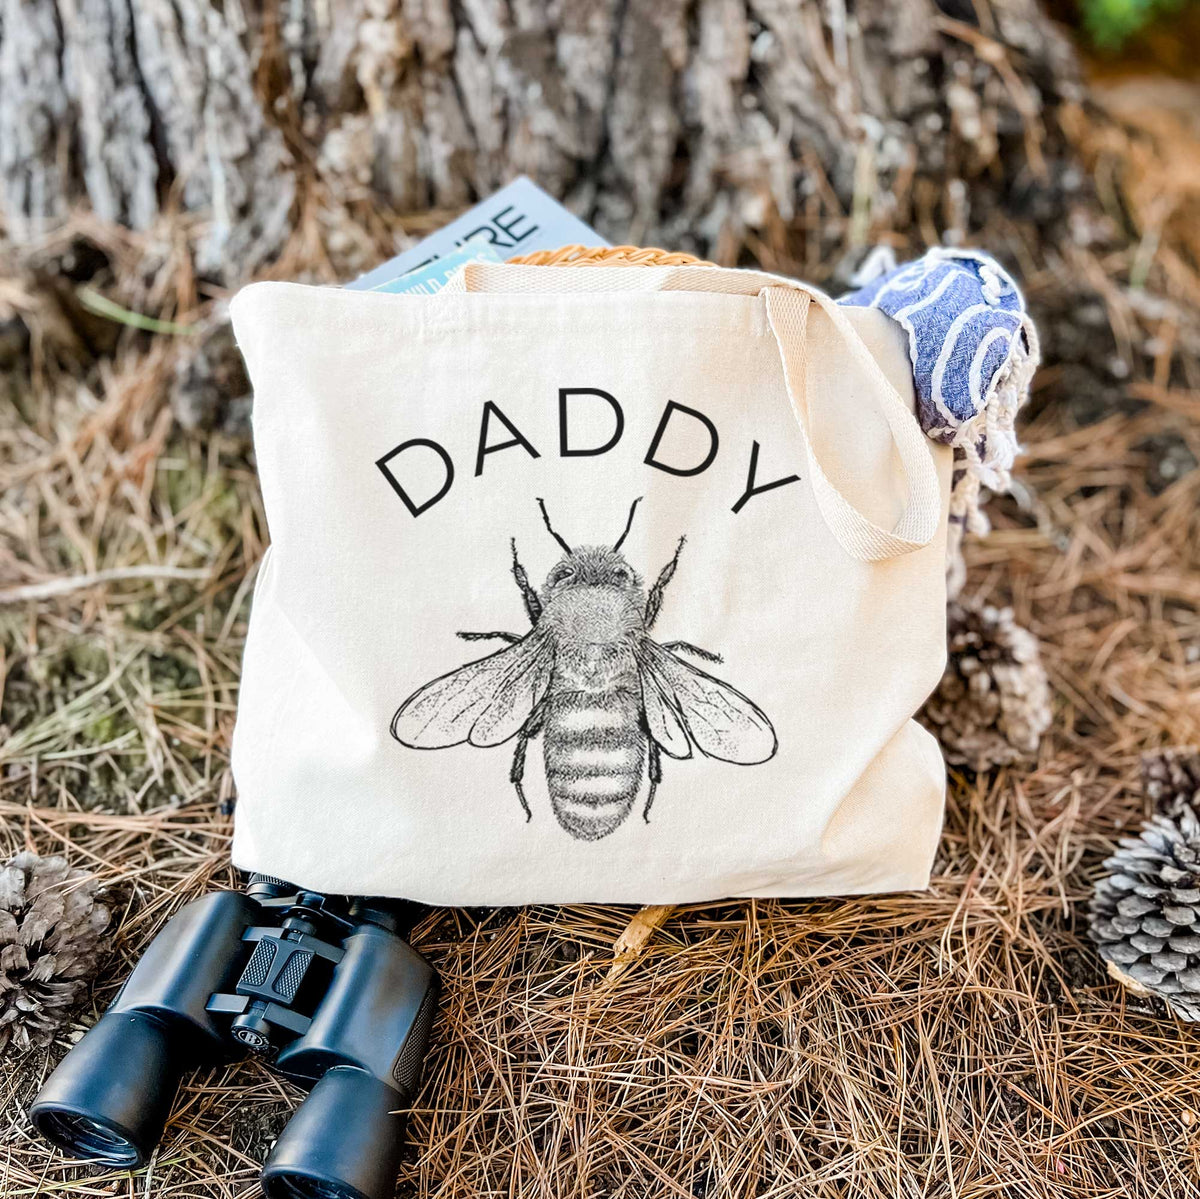 Daddy Bee - Tote Bag